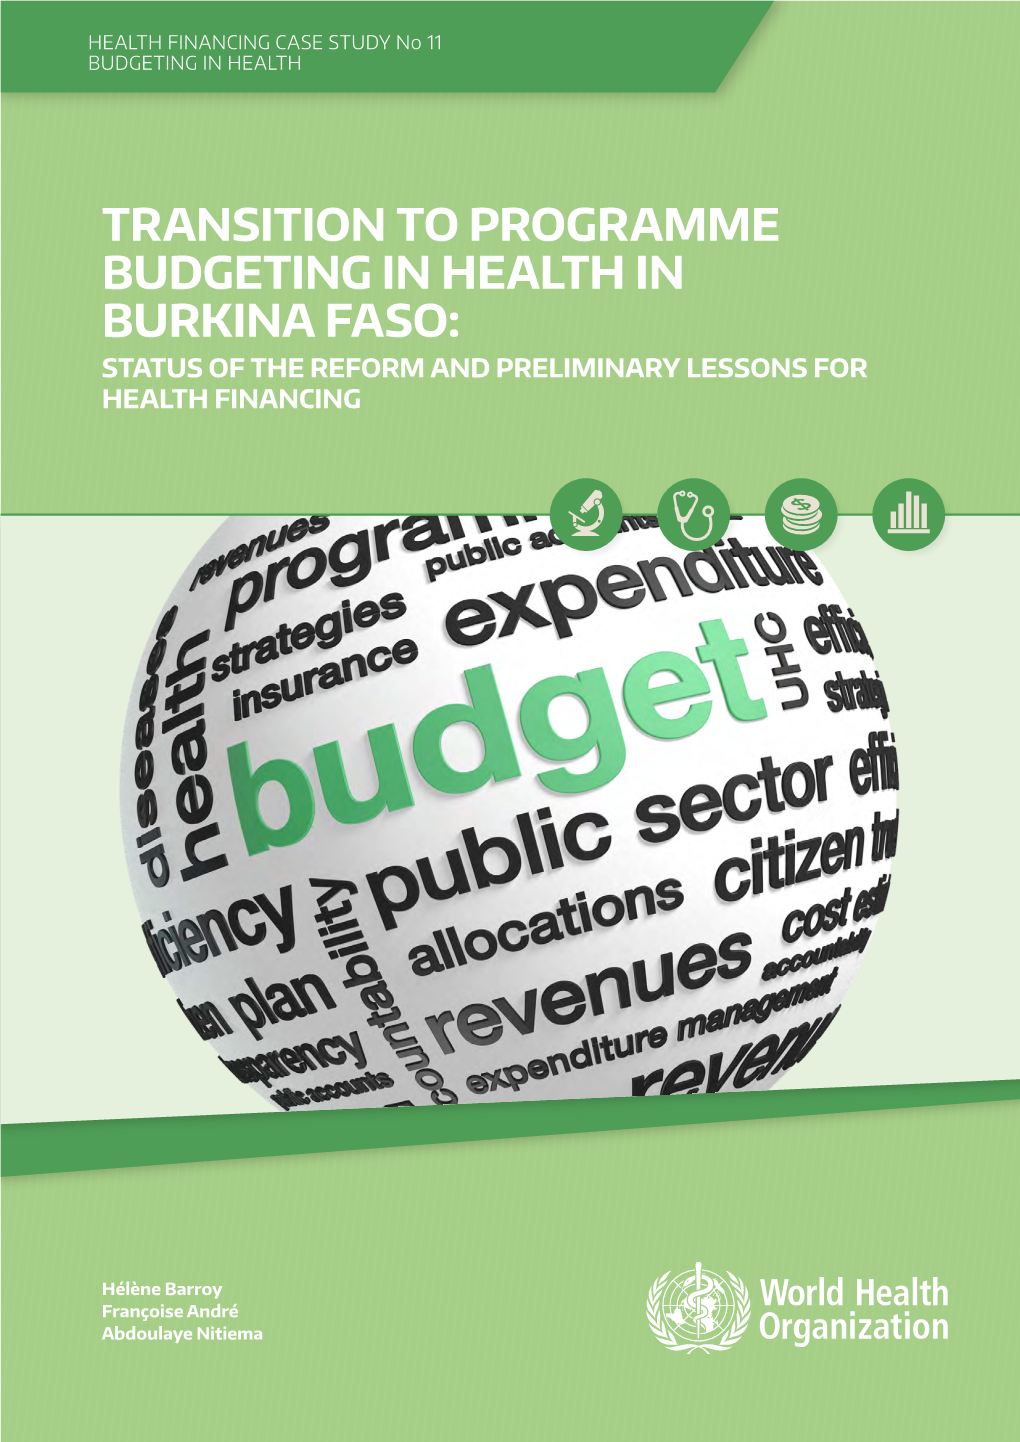 Transition to Programme Budgeting in Health in Burkina Faso: Status of the Reform and Preliminary Lessons for Health Financing